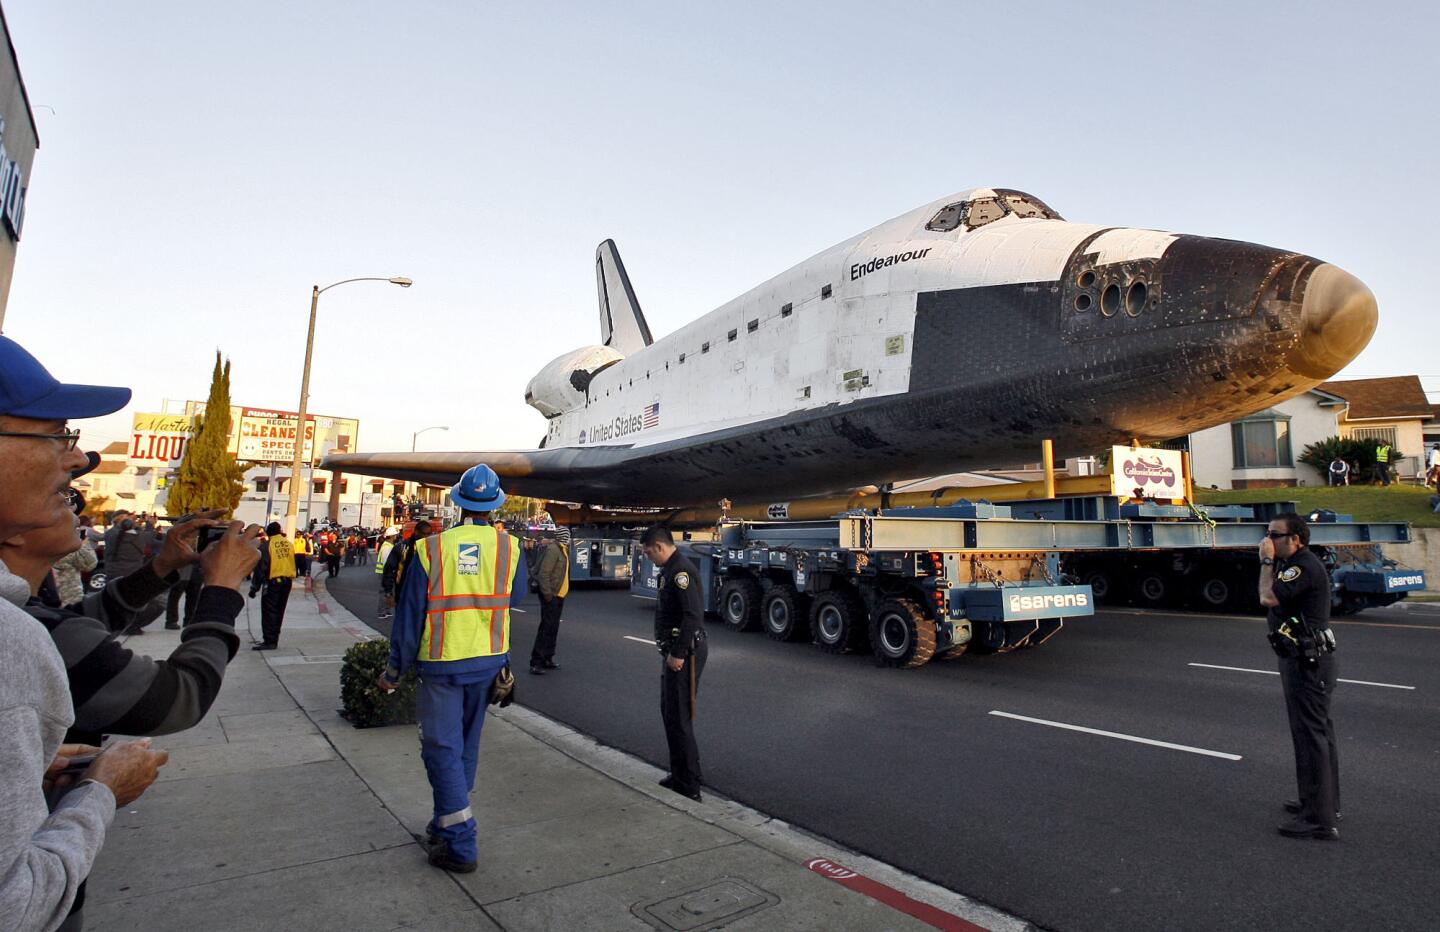 The Space Shuttle Endeavour began its second day of its last trek to the California Science Center on Manchester Blvd. in Inglewood on Saturday, Oct. 13, 2012. Thousands cheered and the 2001: A Space Odyssey theme song played on loud speakers as Endeavour arrived at the Forum. (Raul Roa/Staff Photographer)